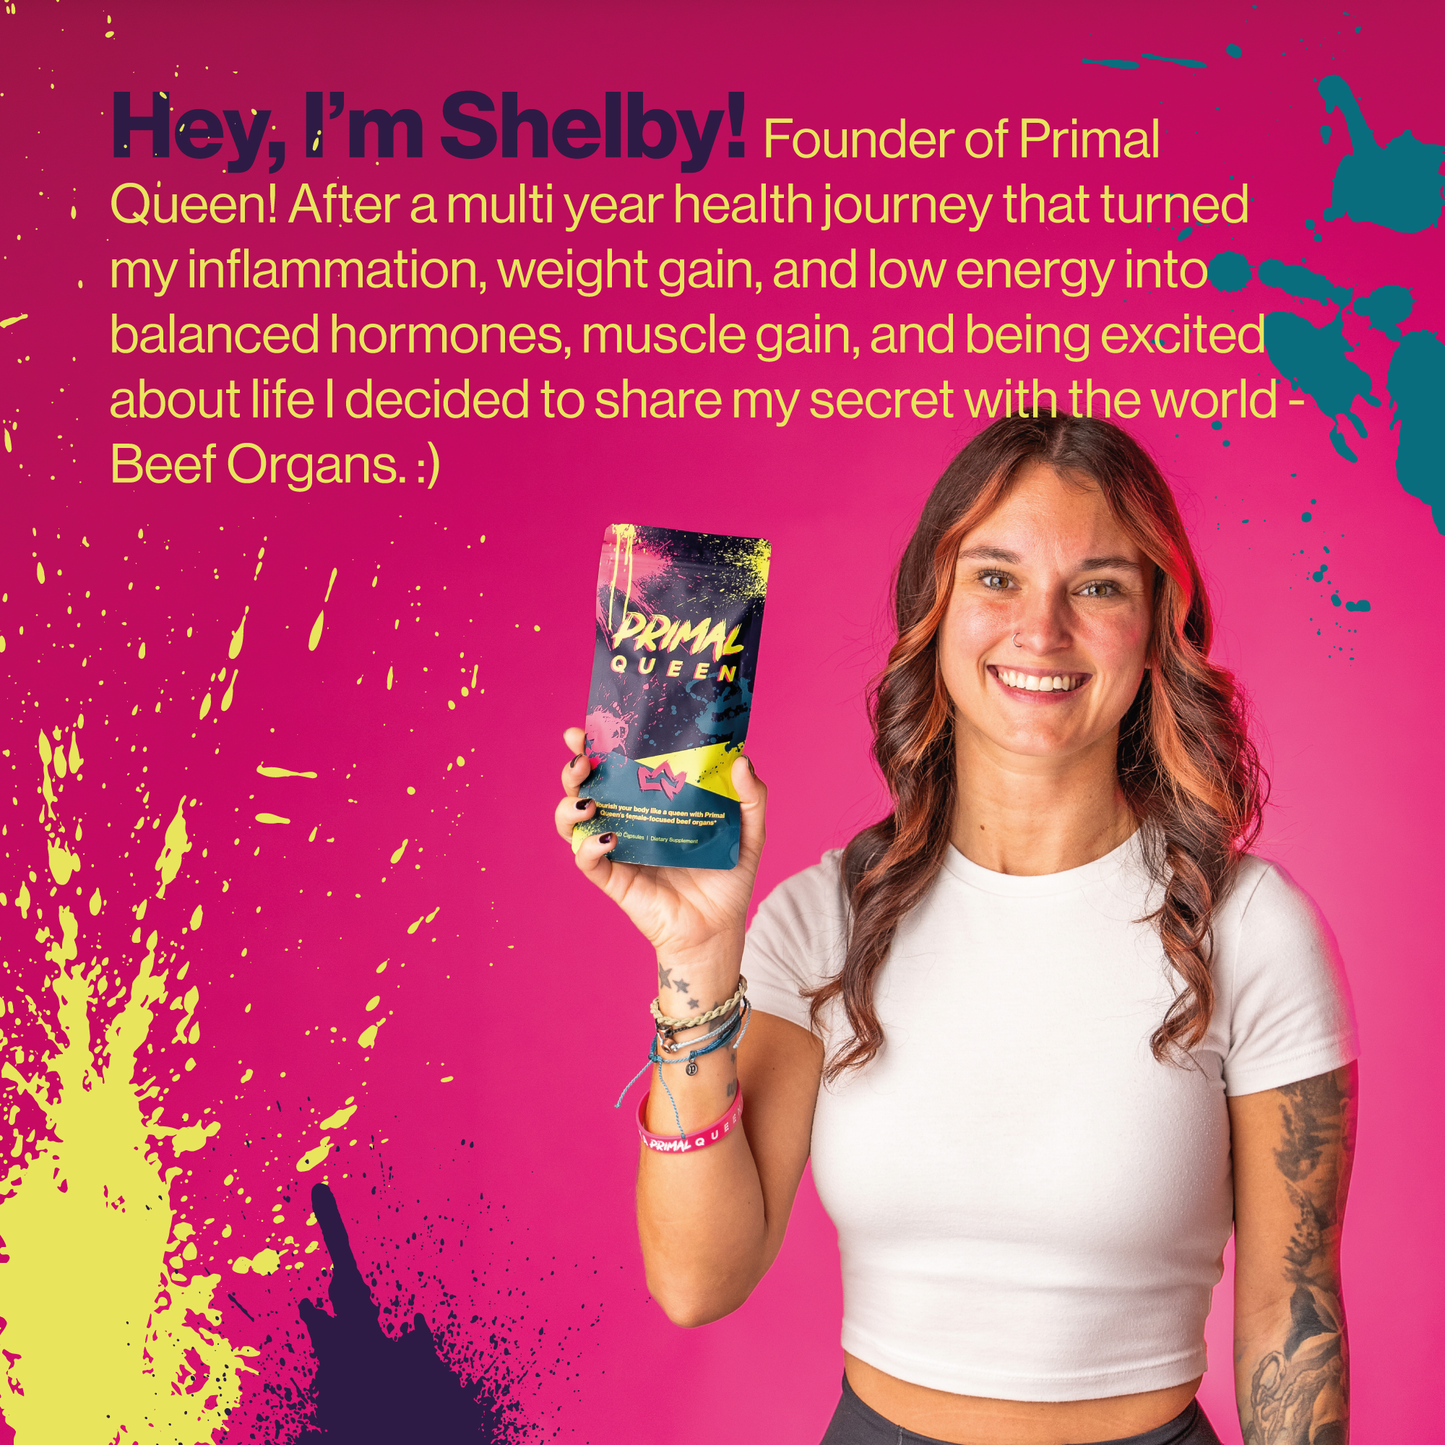 Primal Queen Superfood Beef Organs - 30 Day Supply (One Time Purchase)